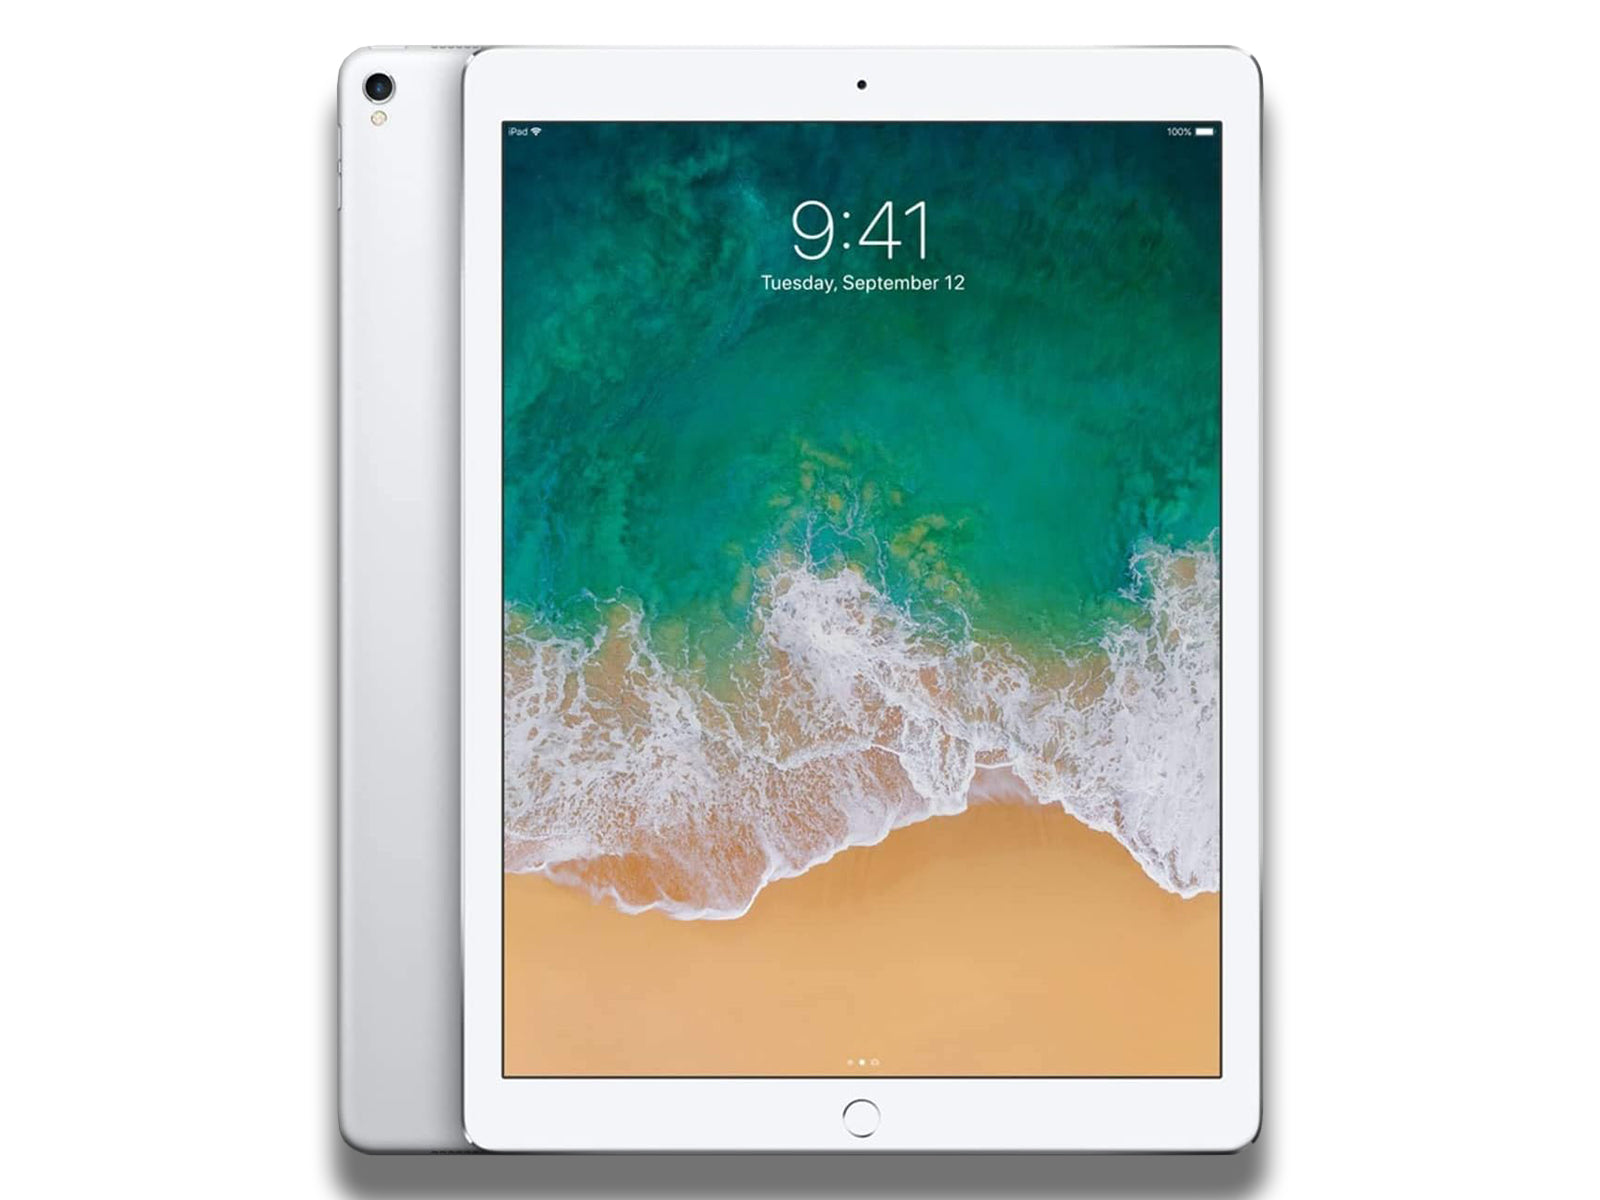 Apple iPad Pro 12.9-inch 2nd Generation front and back view